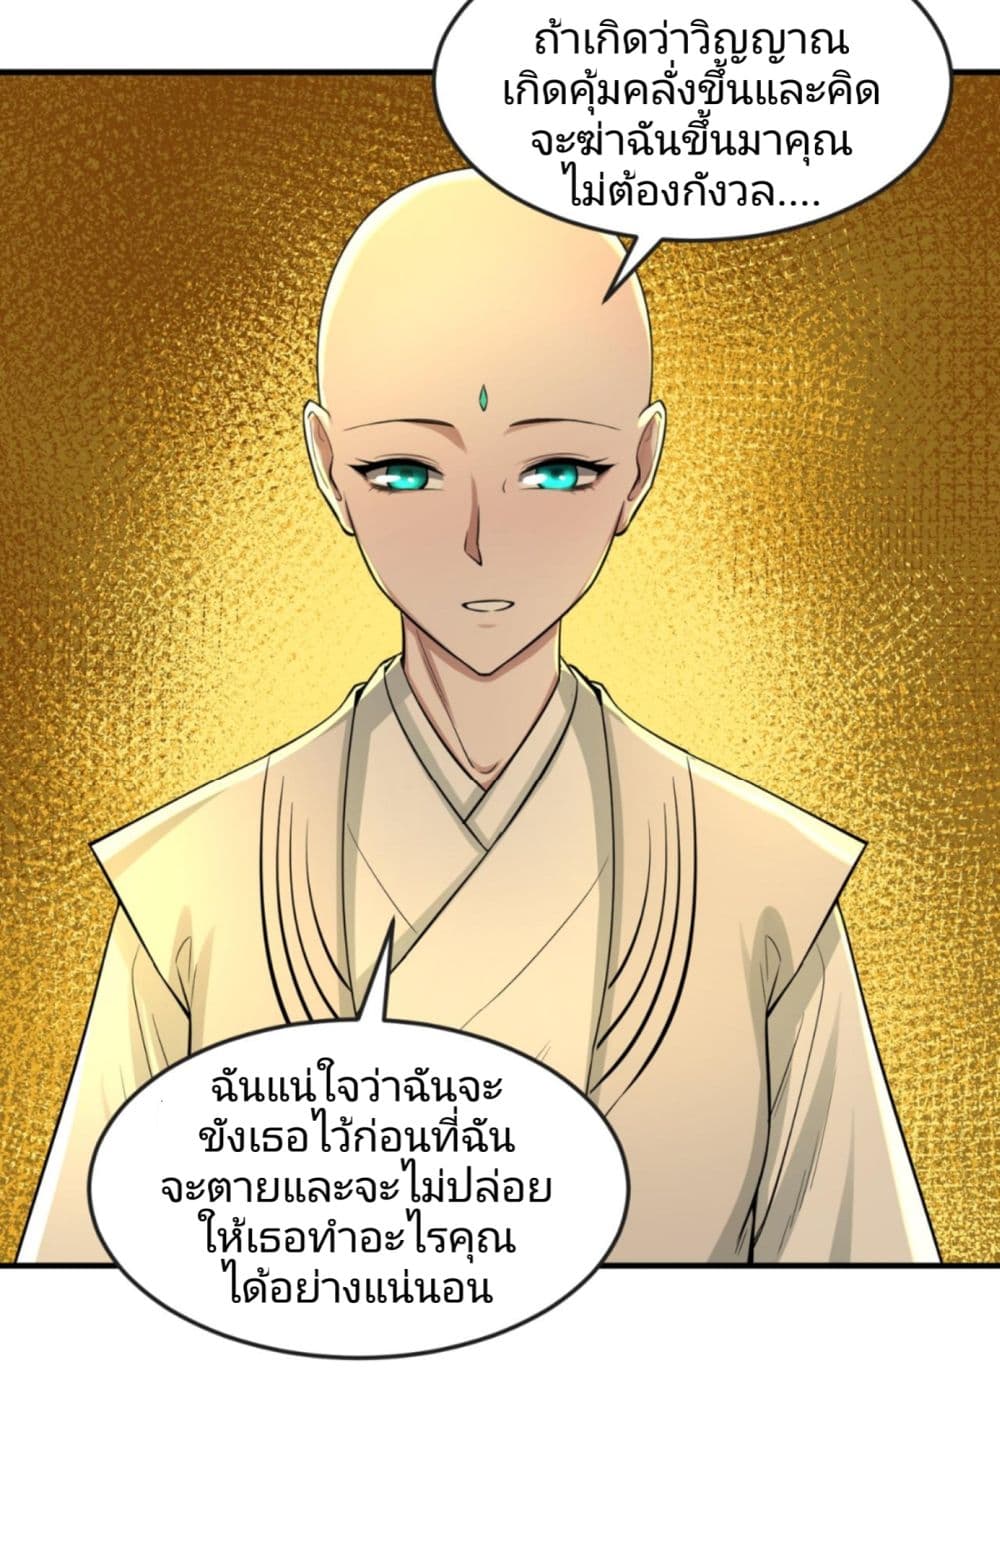 The Age of Ghost Spirits à¸à¸­à¸à¸à¸µà¹ 47 (12)